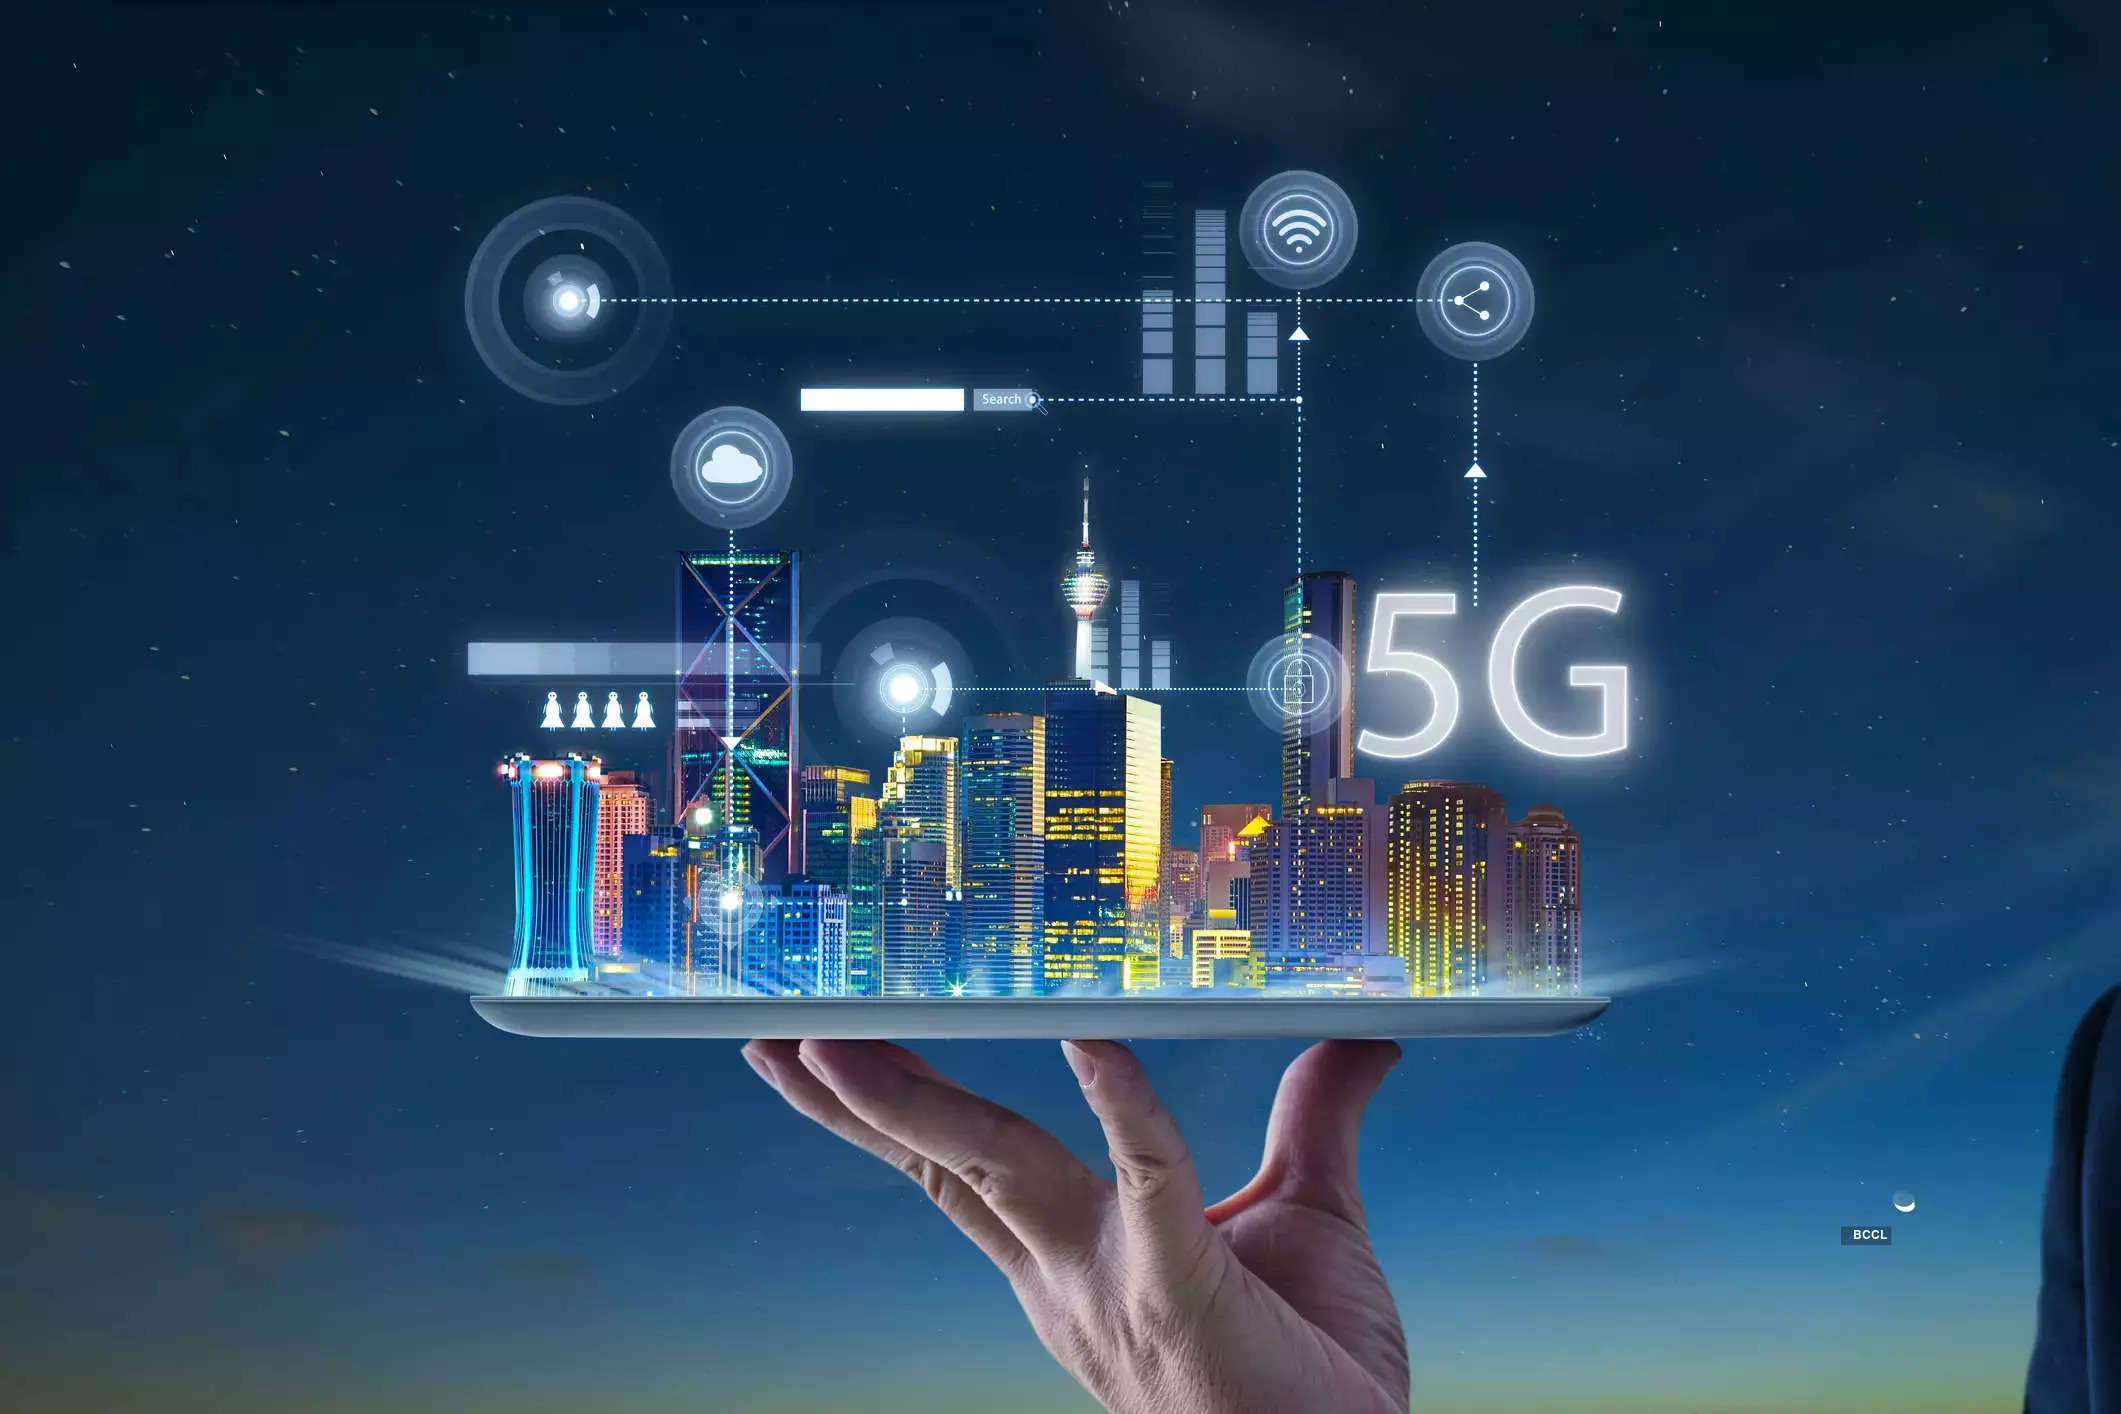 5G users in India to reach 300 million by FY25, rising data consumption to drive ARPU growth: CRISIL, ET Telecom